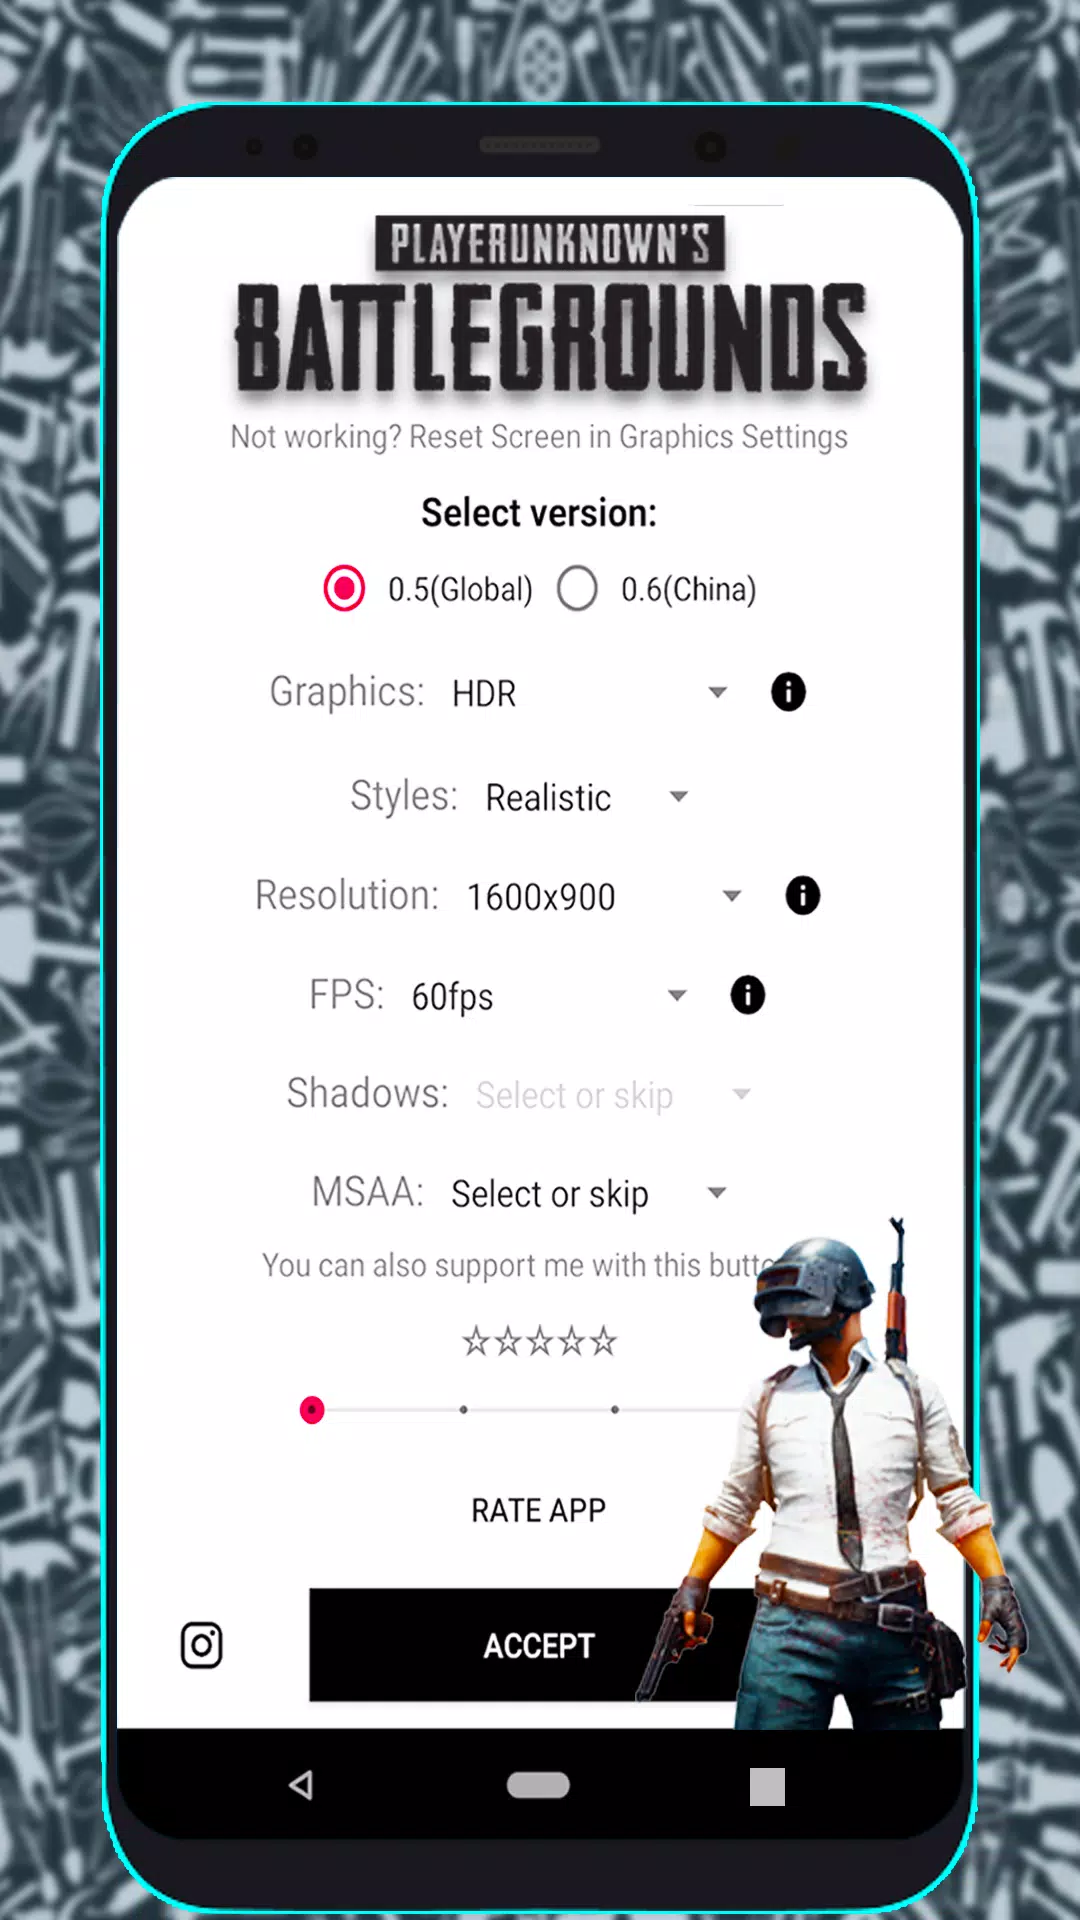 GFX Tool for Roblox - Latest version for Android - Download APK